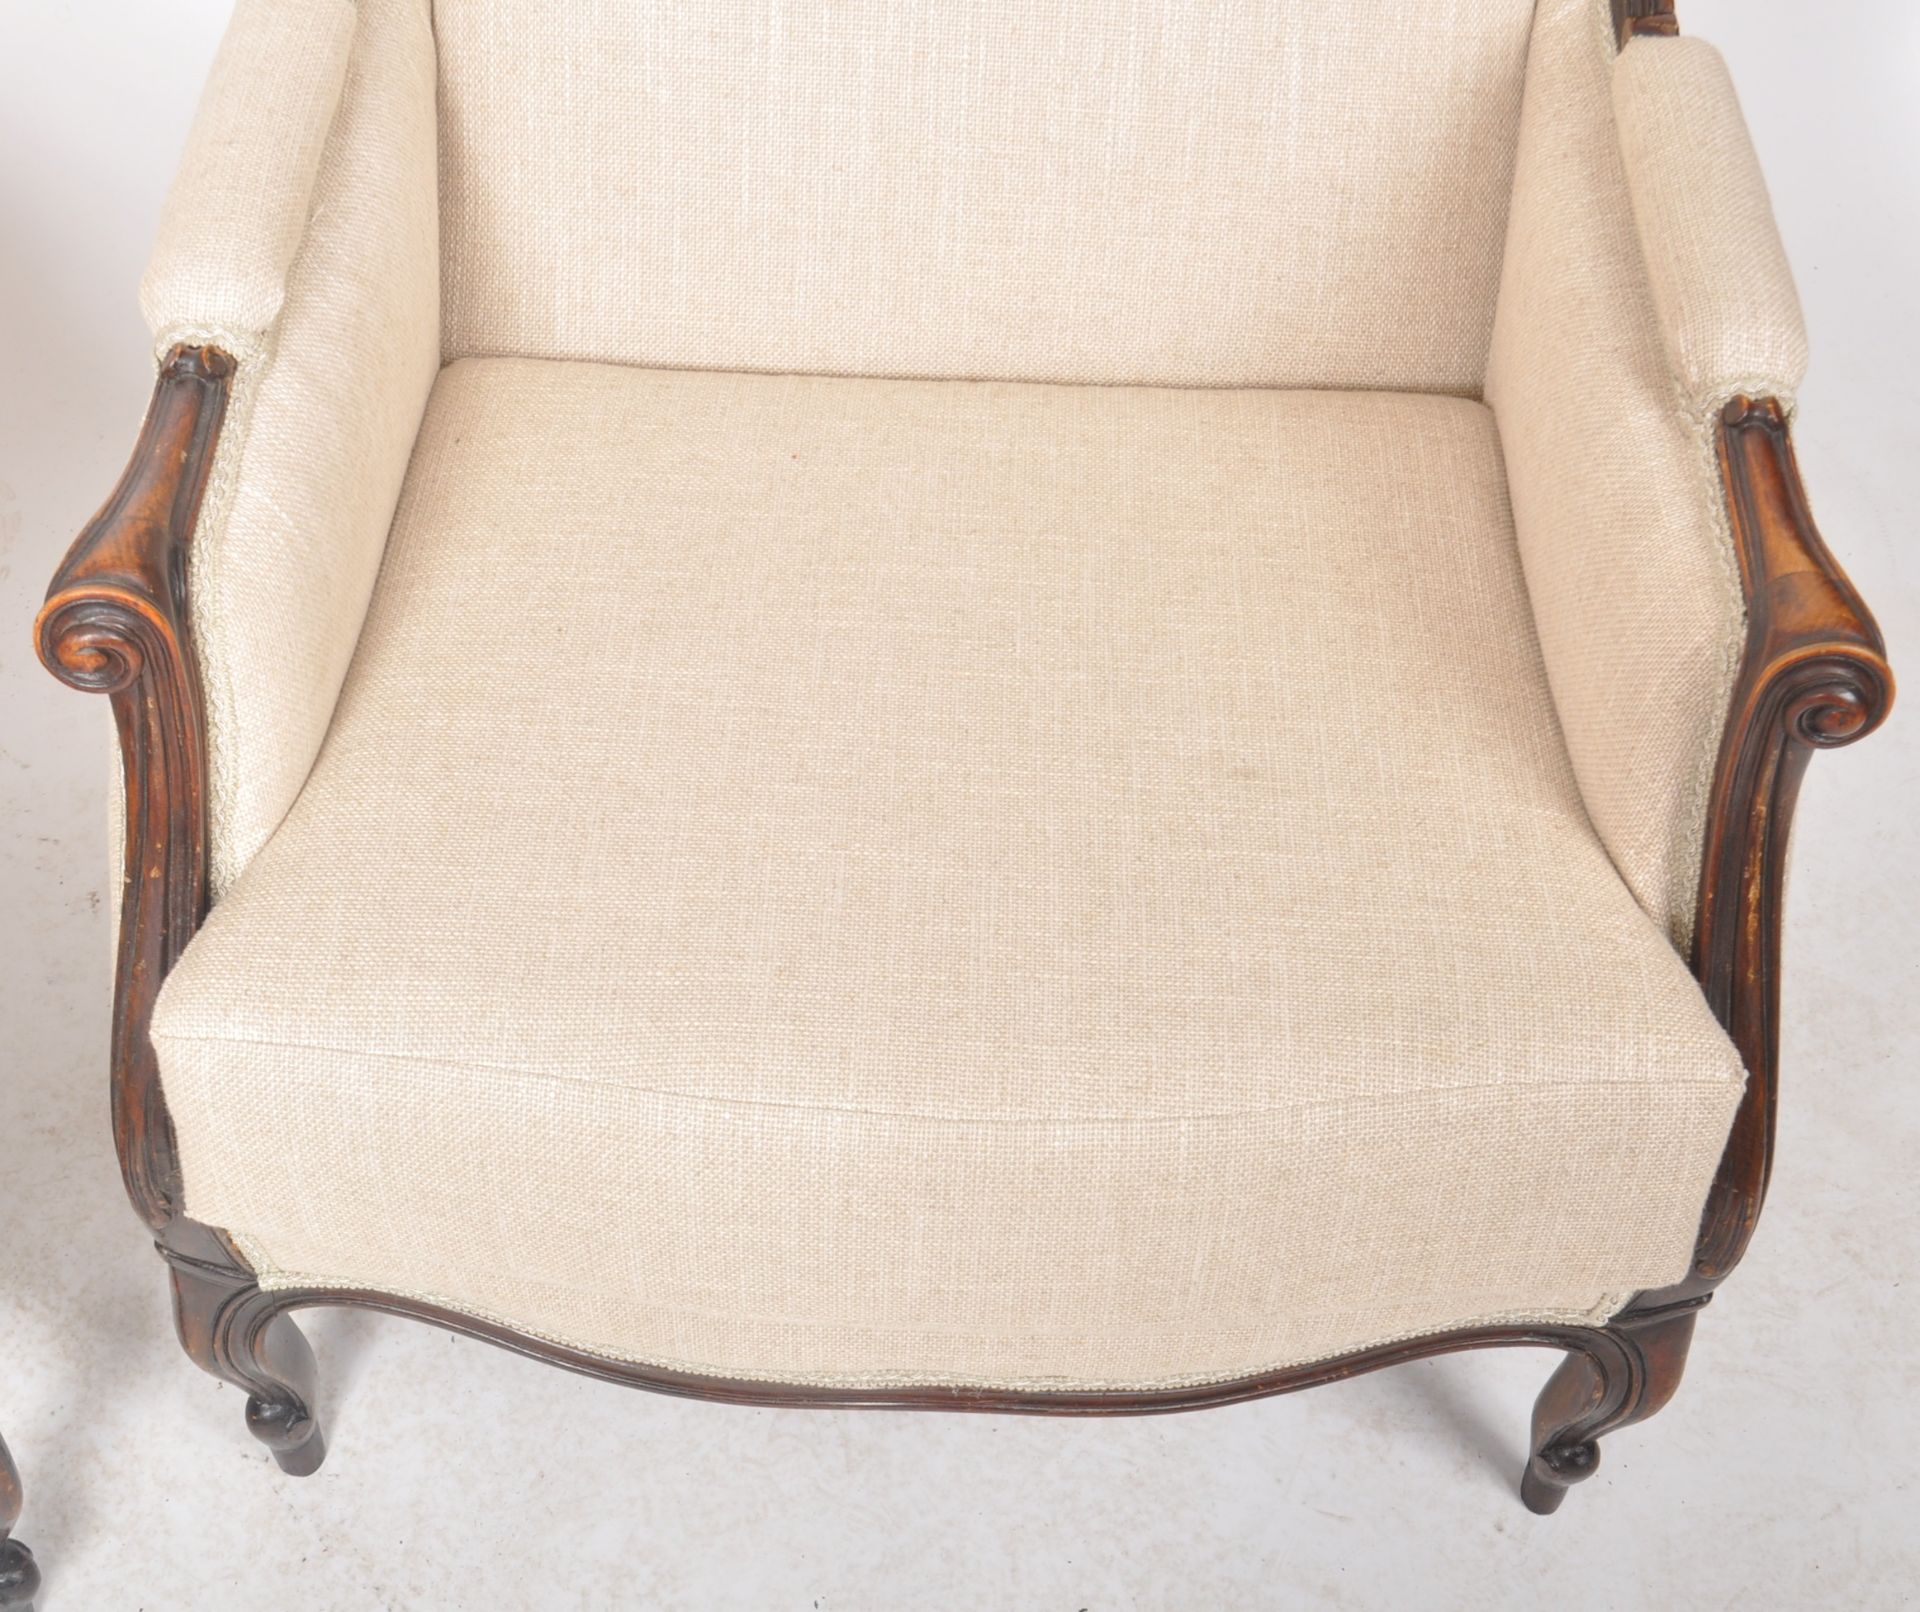 MATCHING PAIR OF 19TH CENTURY FRENCH WINGBACK ARMCHAIRS - Image 4 of 7